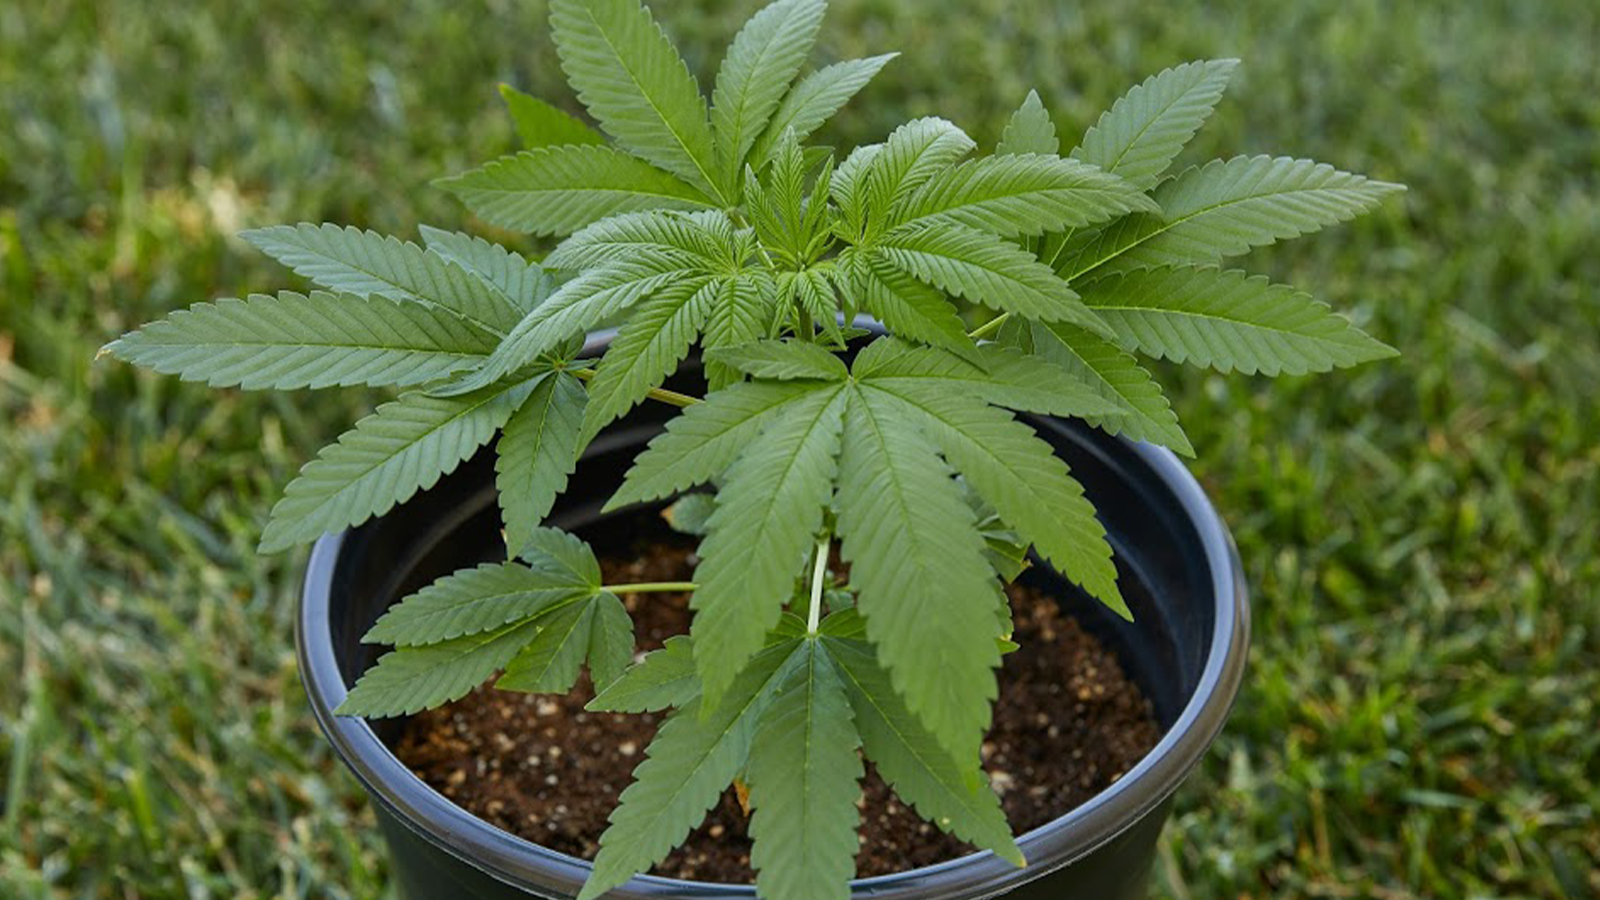 Growing weed in pots outdoors